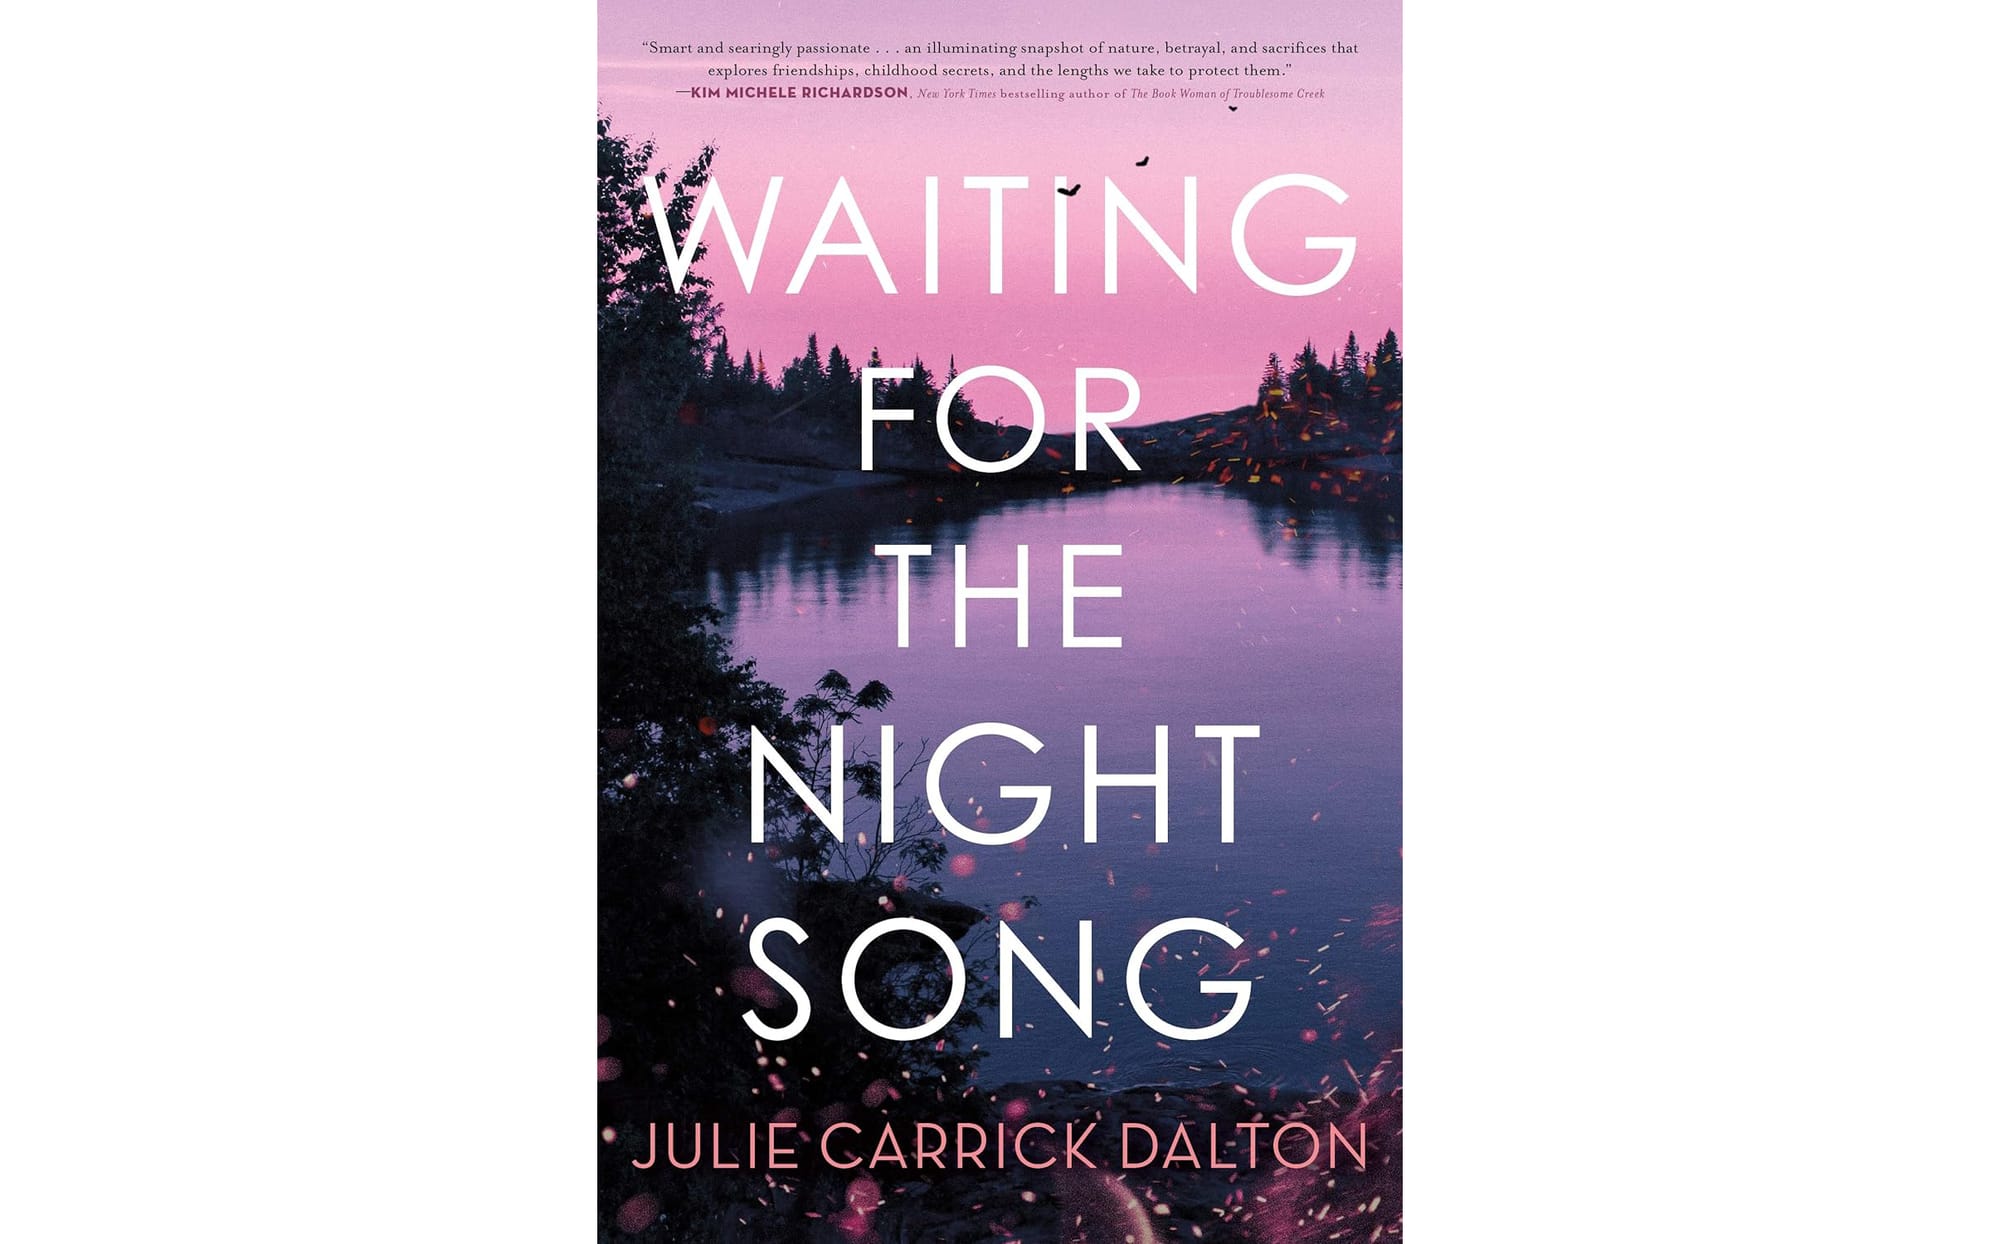 Book Review: Waiting for the Night Song